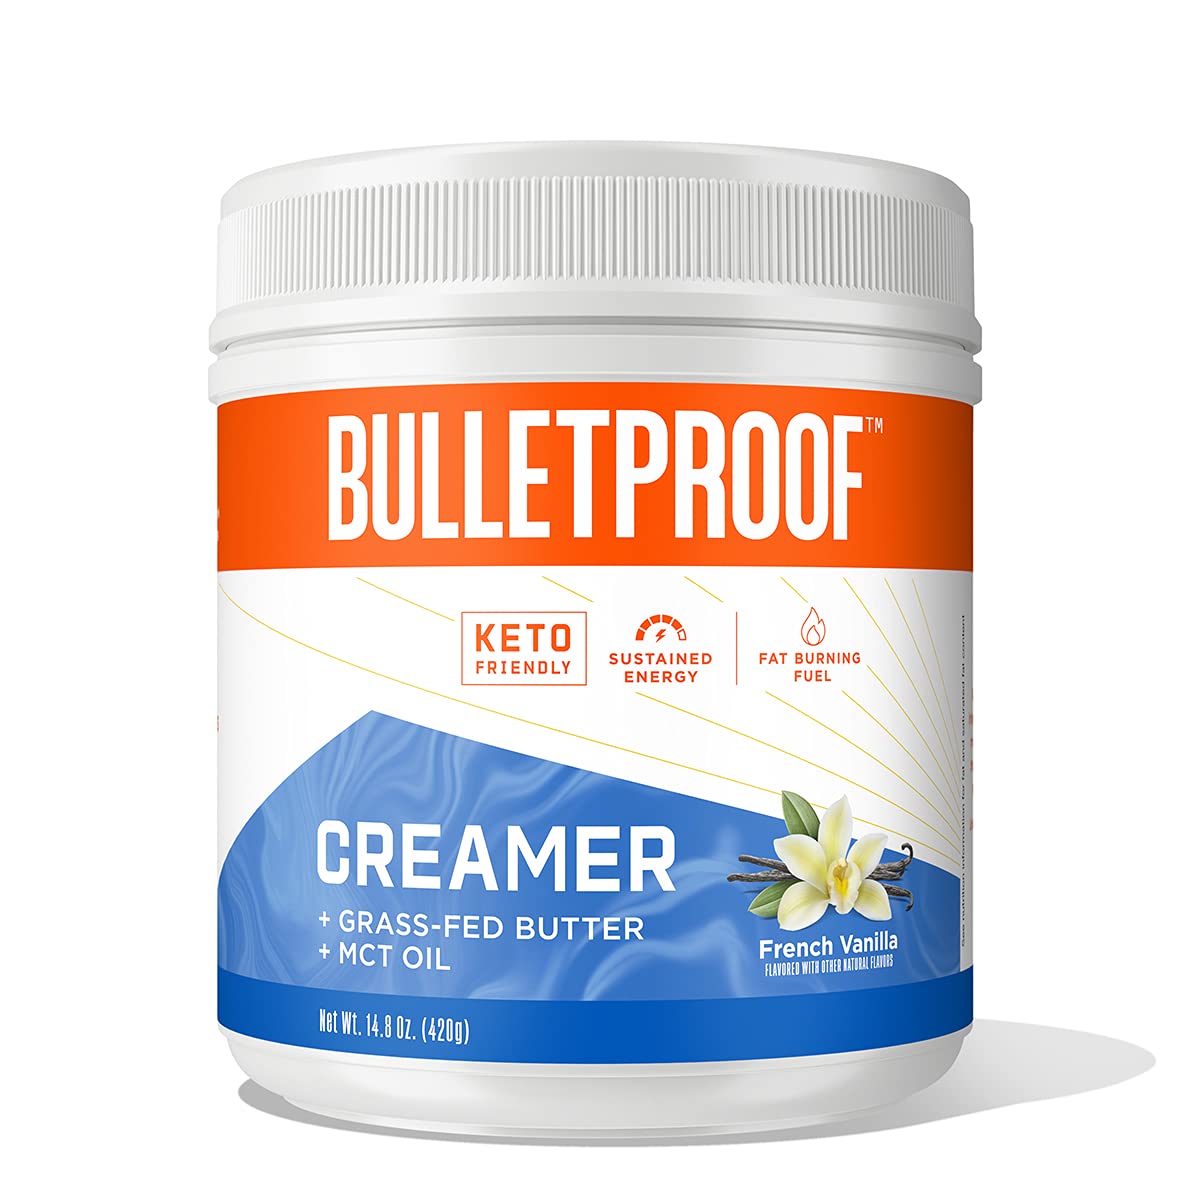 Bulletproof French Vanilla Creamer, 14.8 Ounces, Keto Coffee Creamer with MCT Oil and Grass-Fed Butter